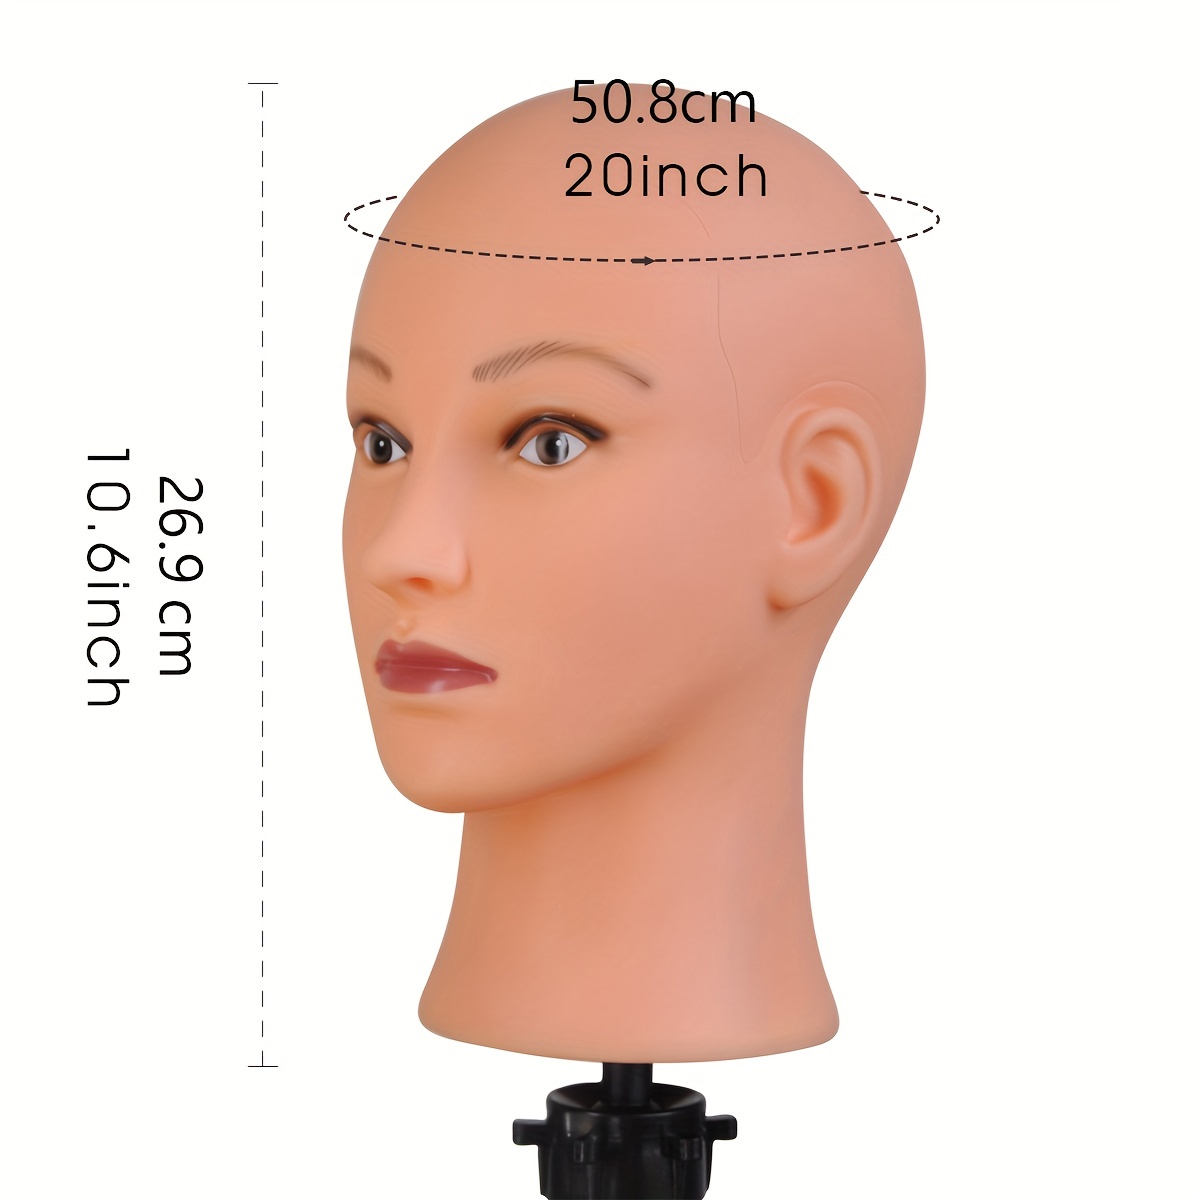 PVC Female Bald Mannequin Head Model Cosmetology Wig Hat Glasses With Clamp